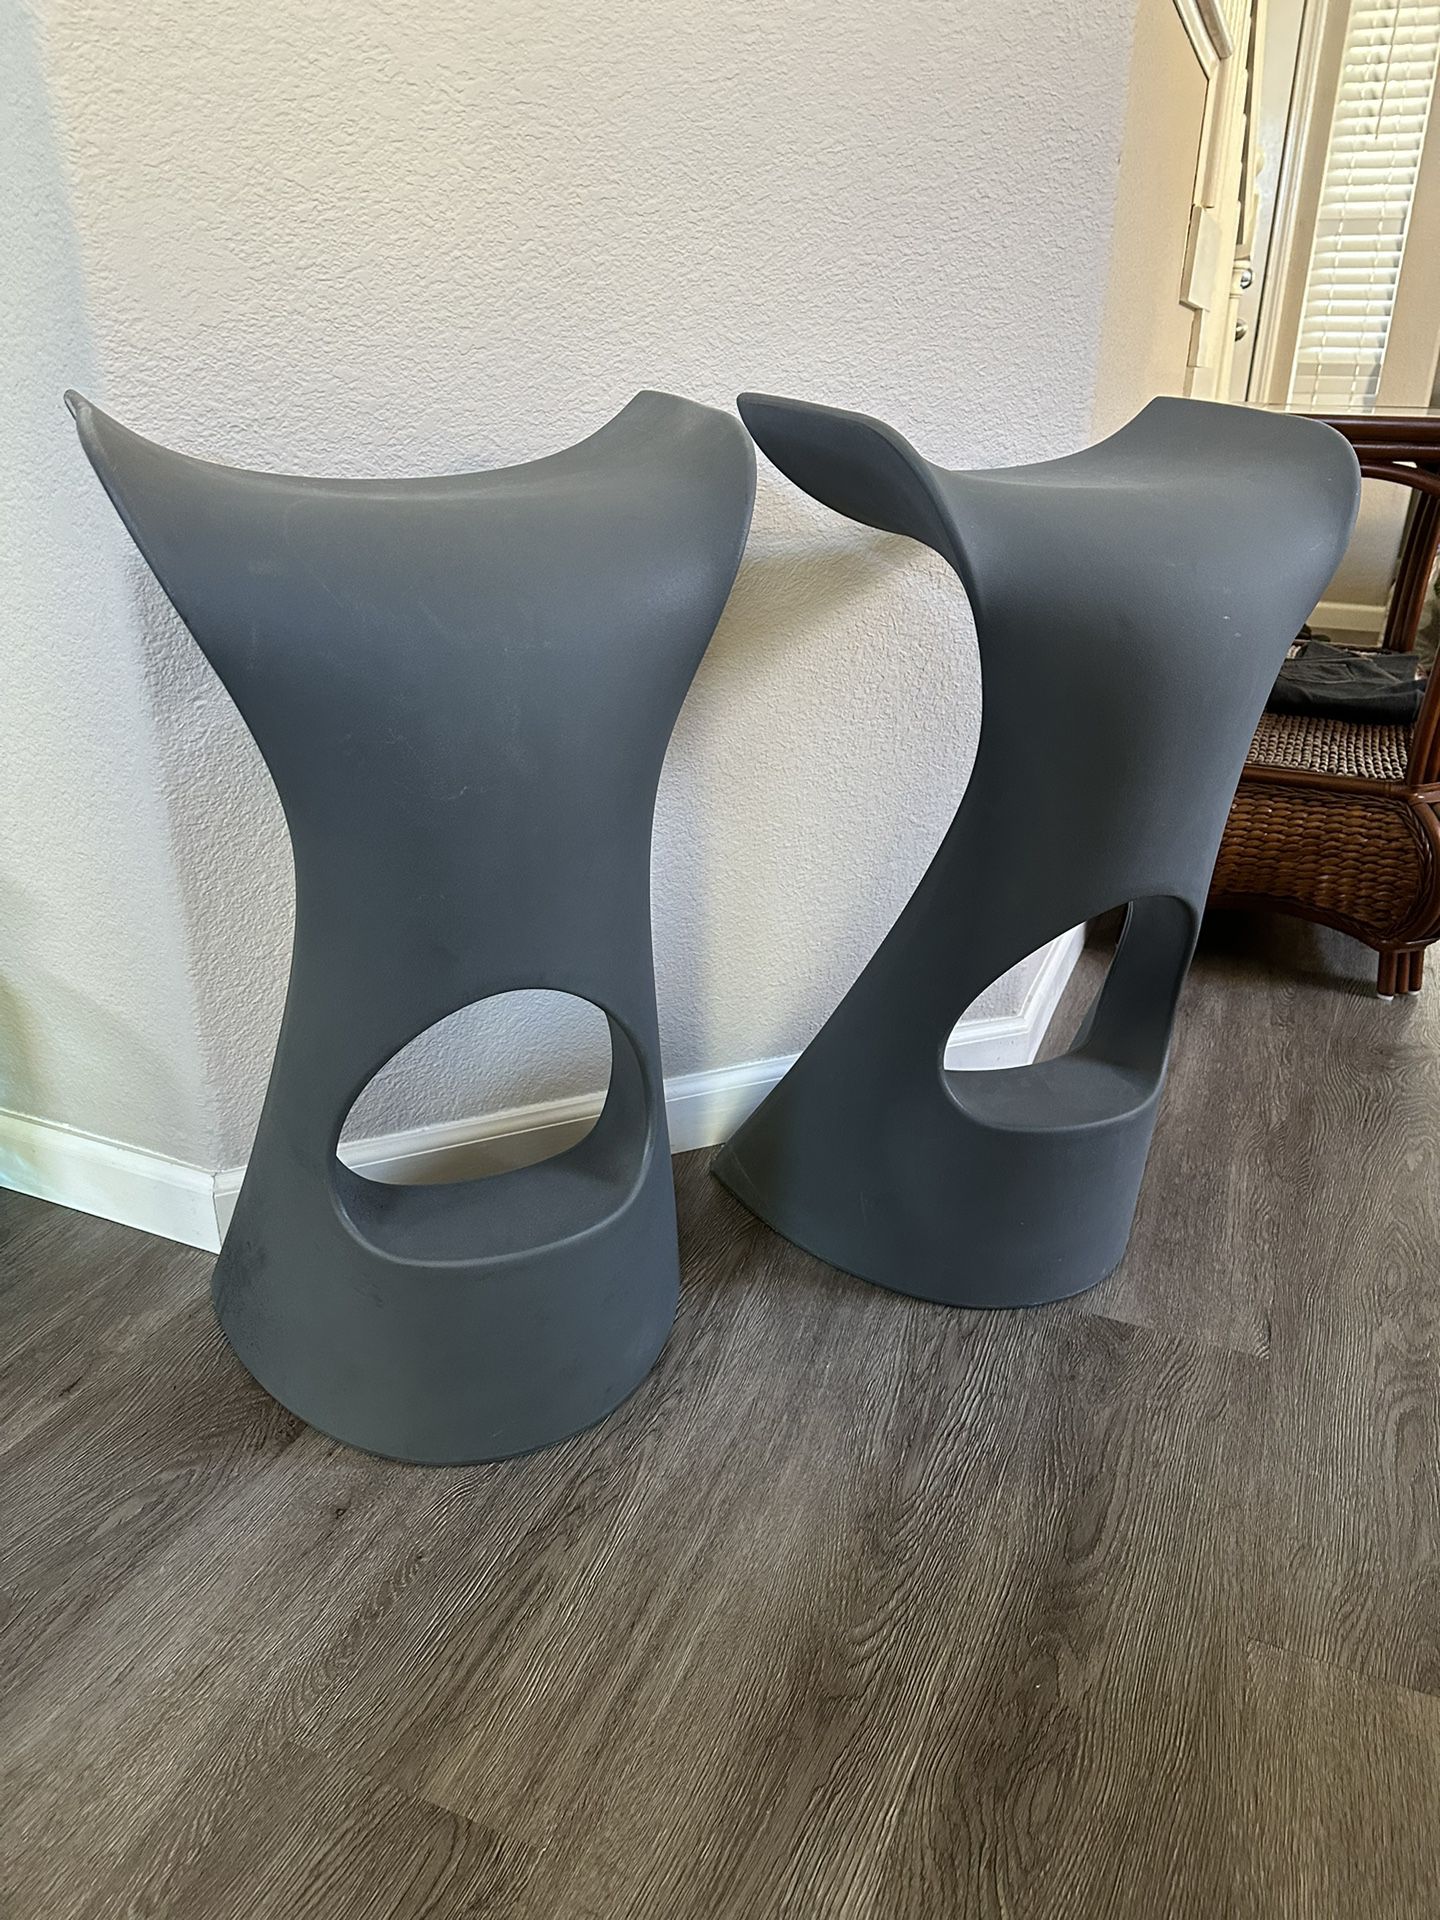 2 grey Slide Koncord Stools - Indoor & Outdoor, Designed by Karim Rashid, made in Italy Designed by Karim Rashid, The Koncord Stool is a contemporary 